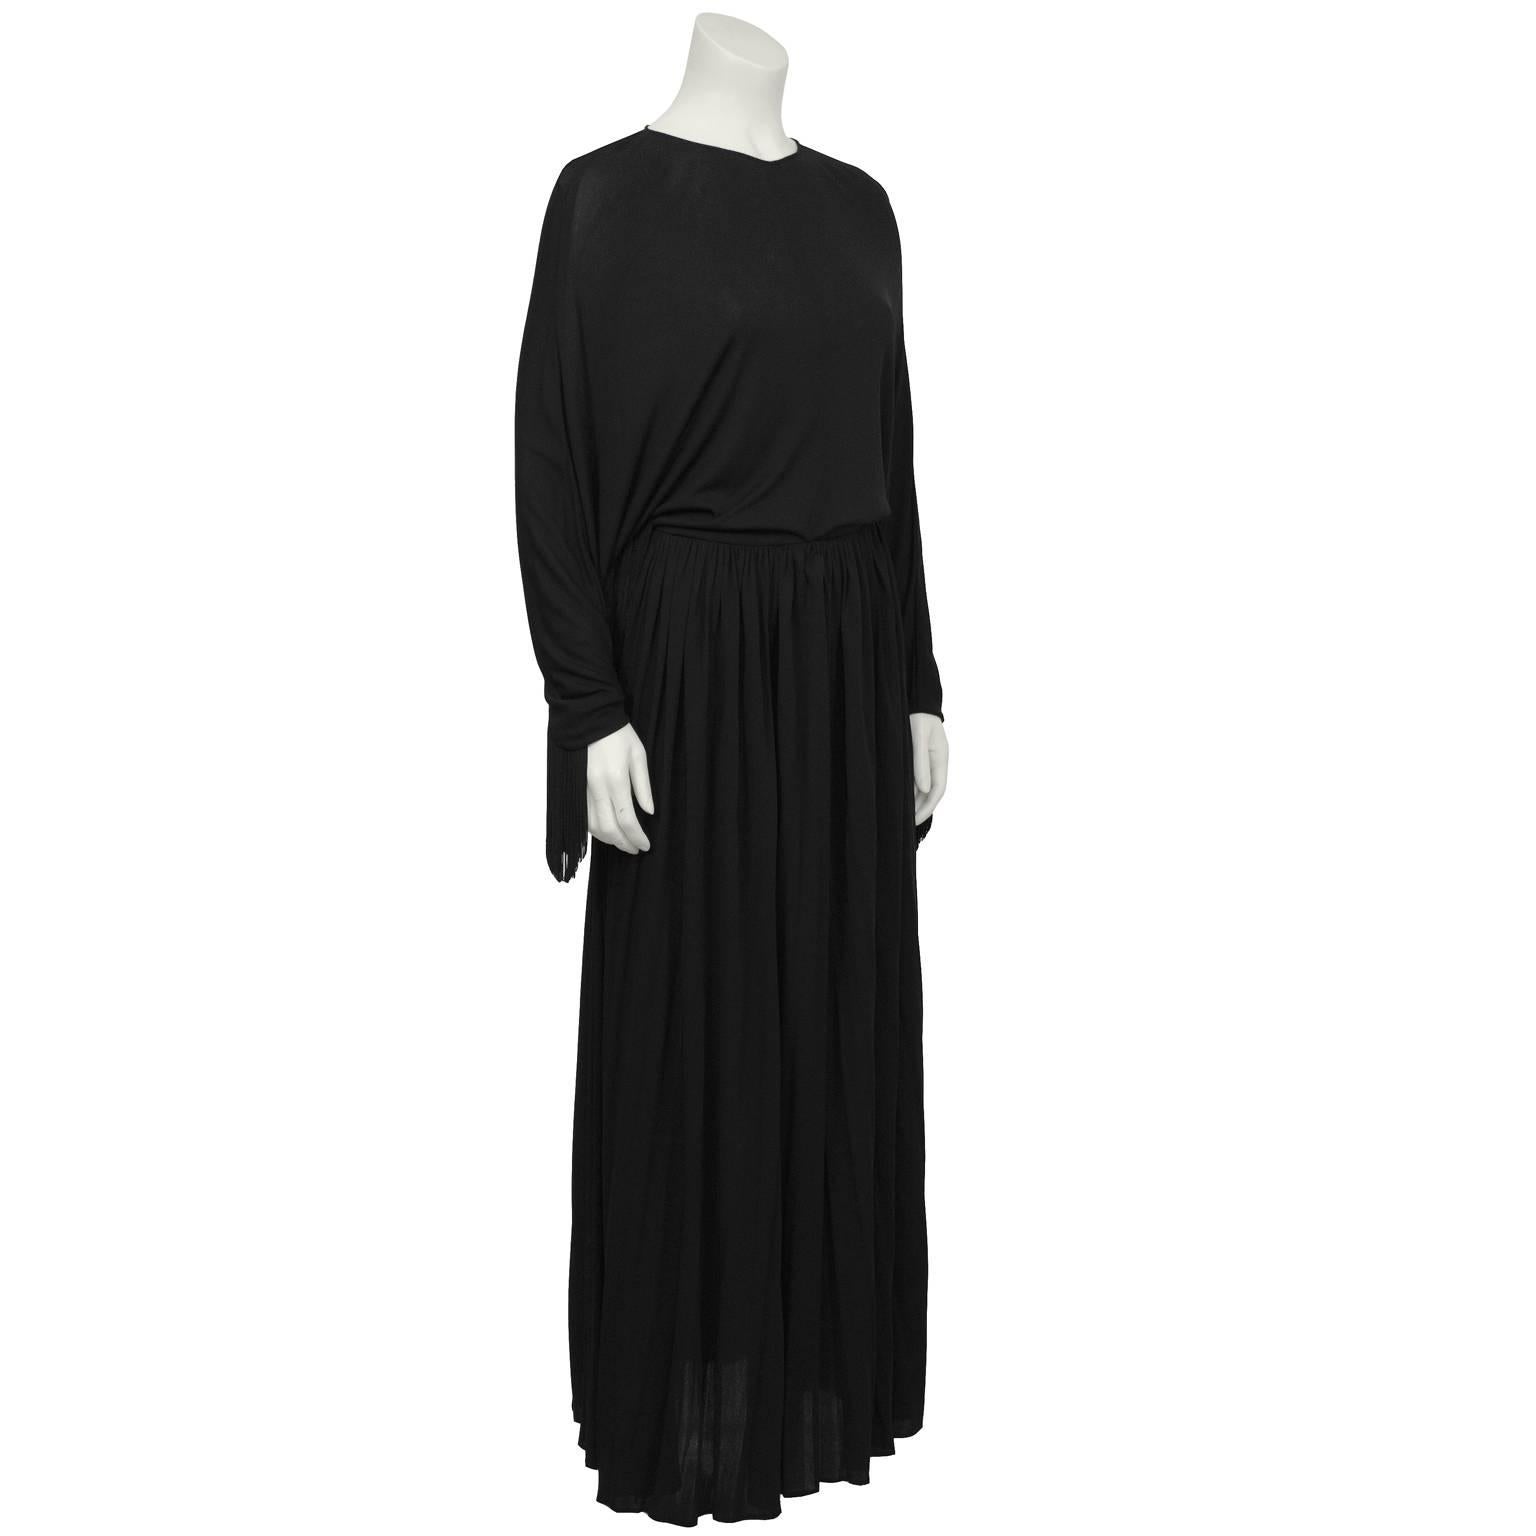 Dramatic black jersey long sleeve gown from the 1970's. The gown has bat wing sleeves that are trimmed in black fringe and the skirt falls full gathered from the waistline. Zips up the back, hidden in-seam pockets and a waist tie on the inside keeps